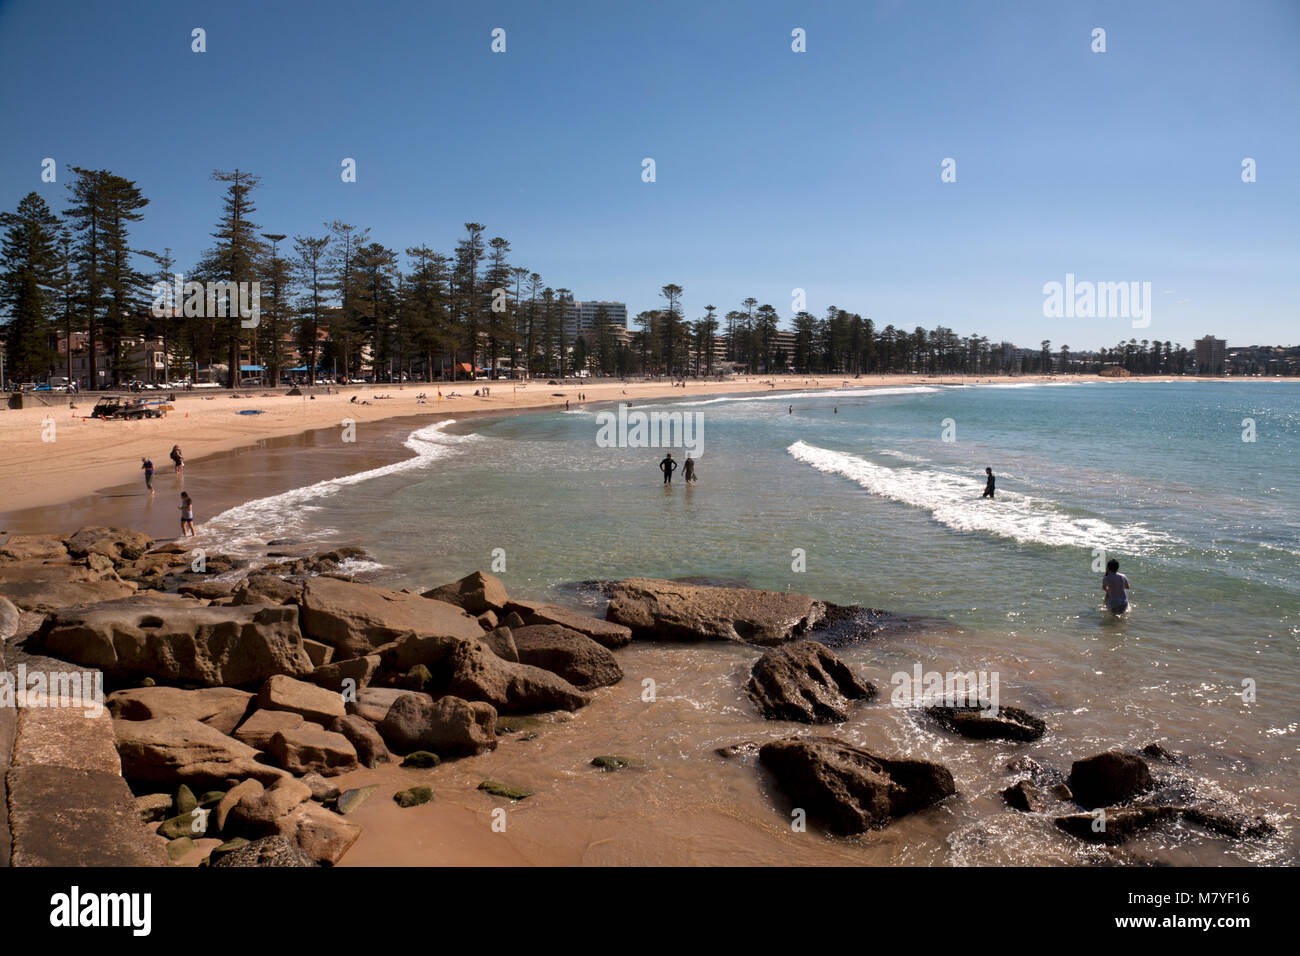 manly beach manly sydney new south wales australia Stock Photo